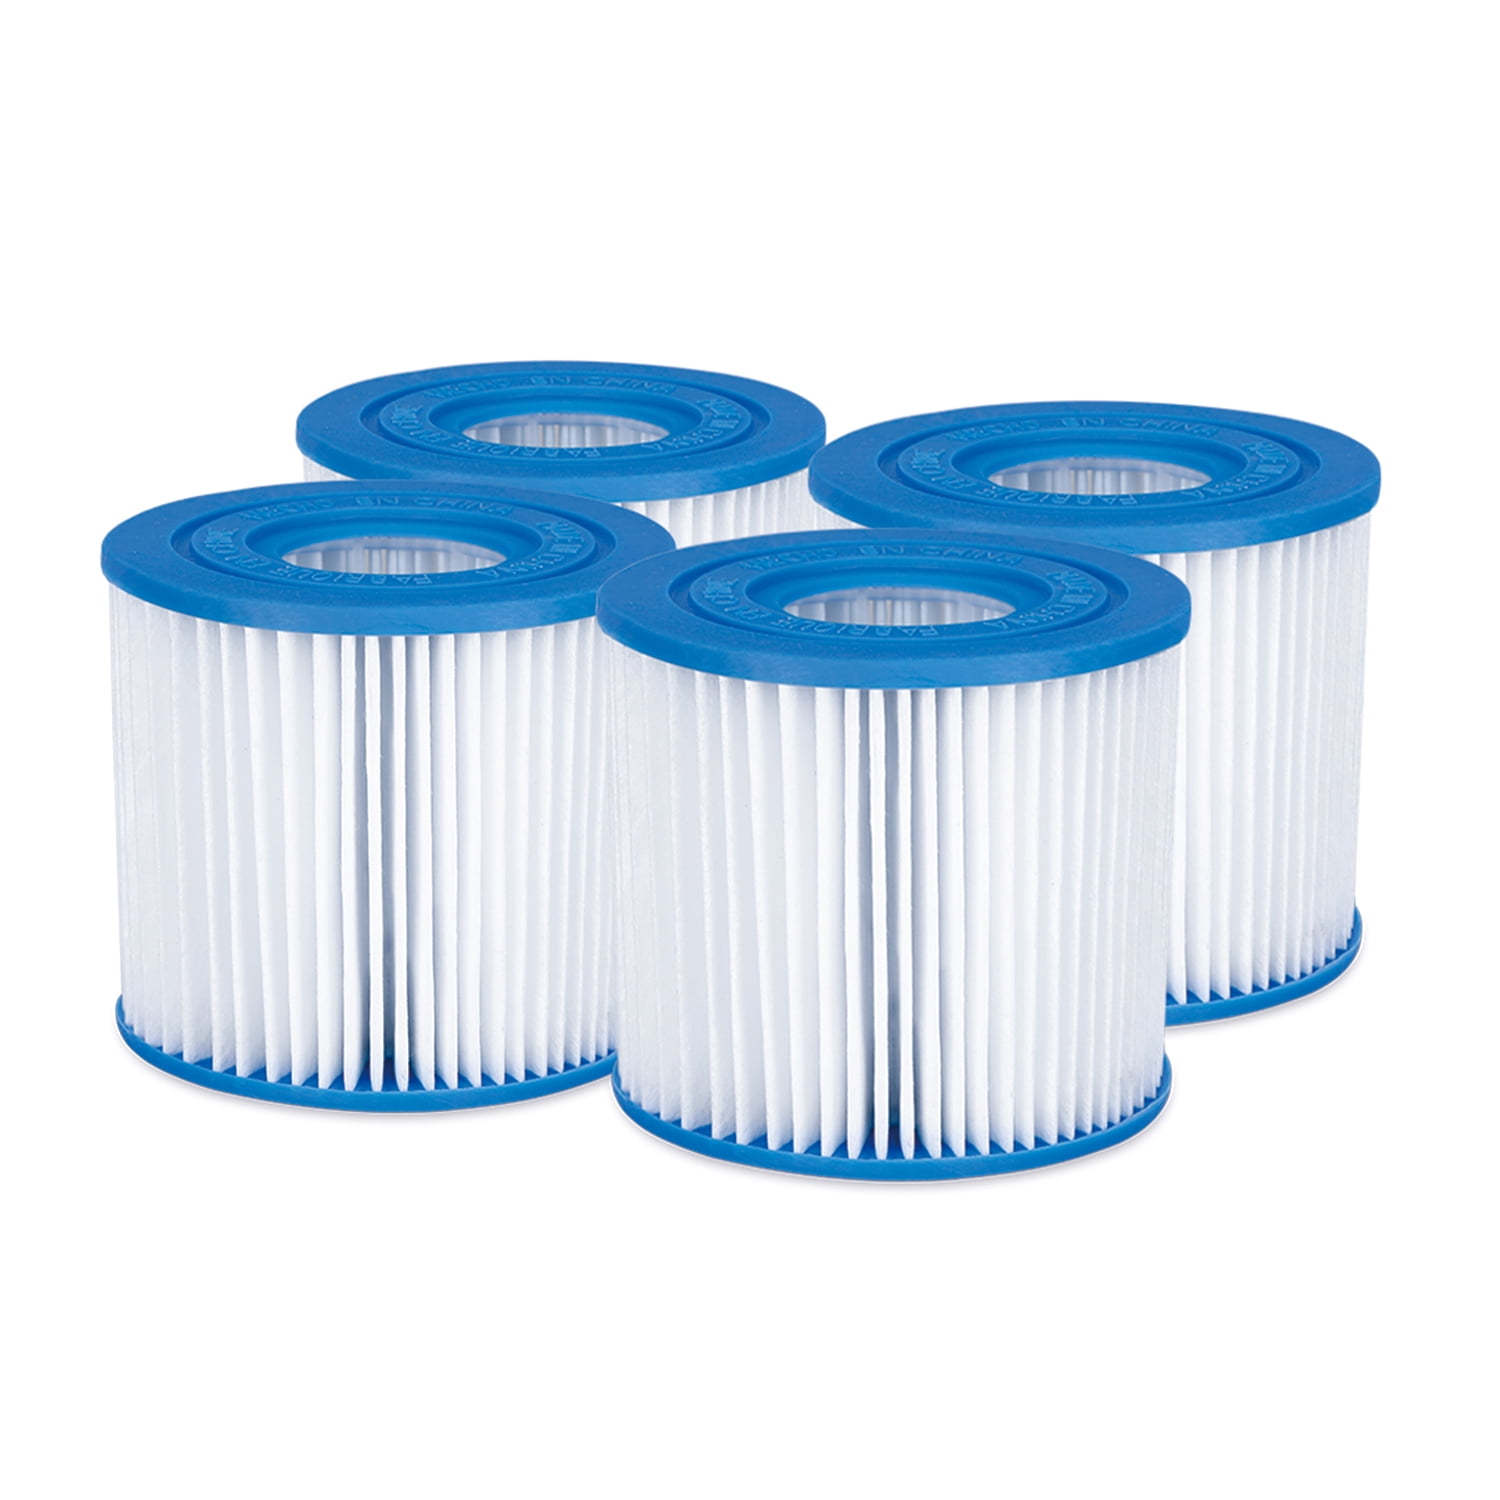 Summer Waves Type A/C Swimming Pool Pump Filter Cartridge Pack Of 2 Two 